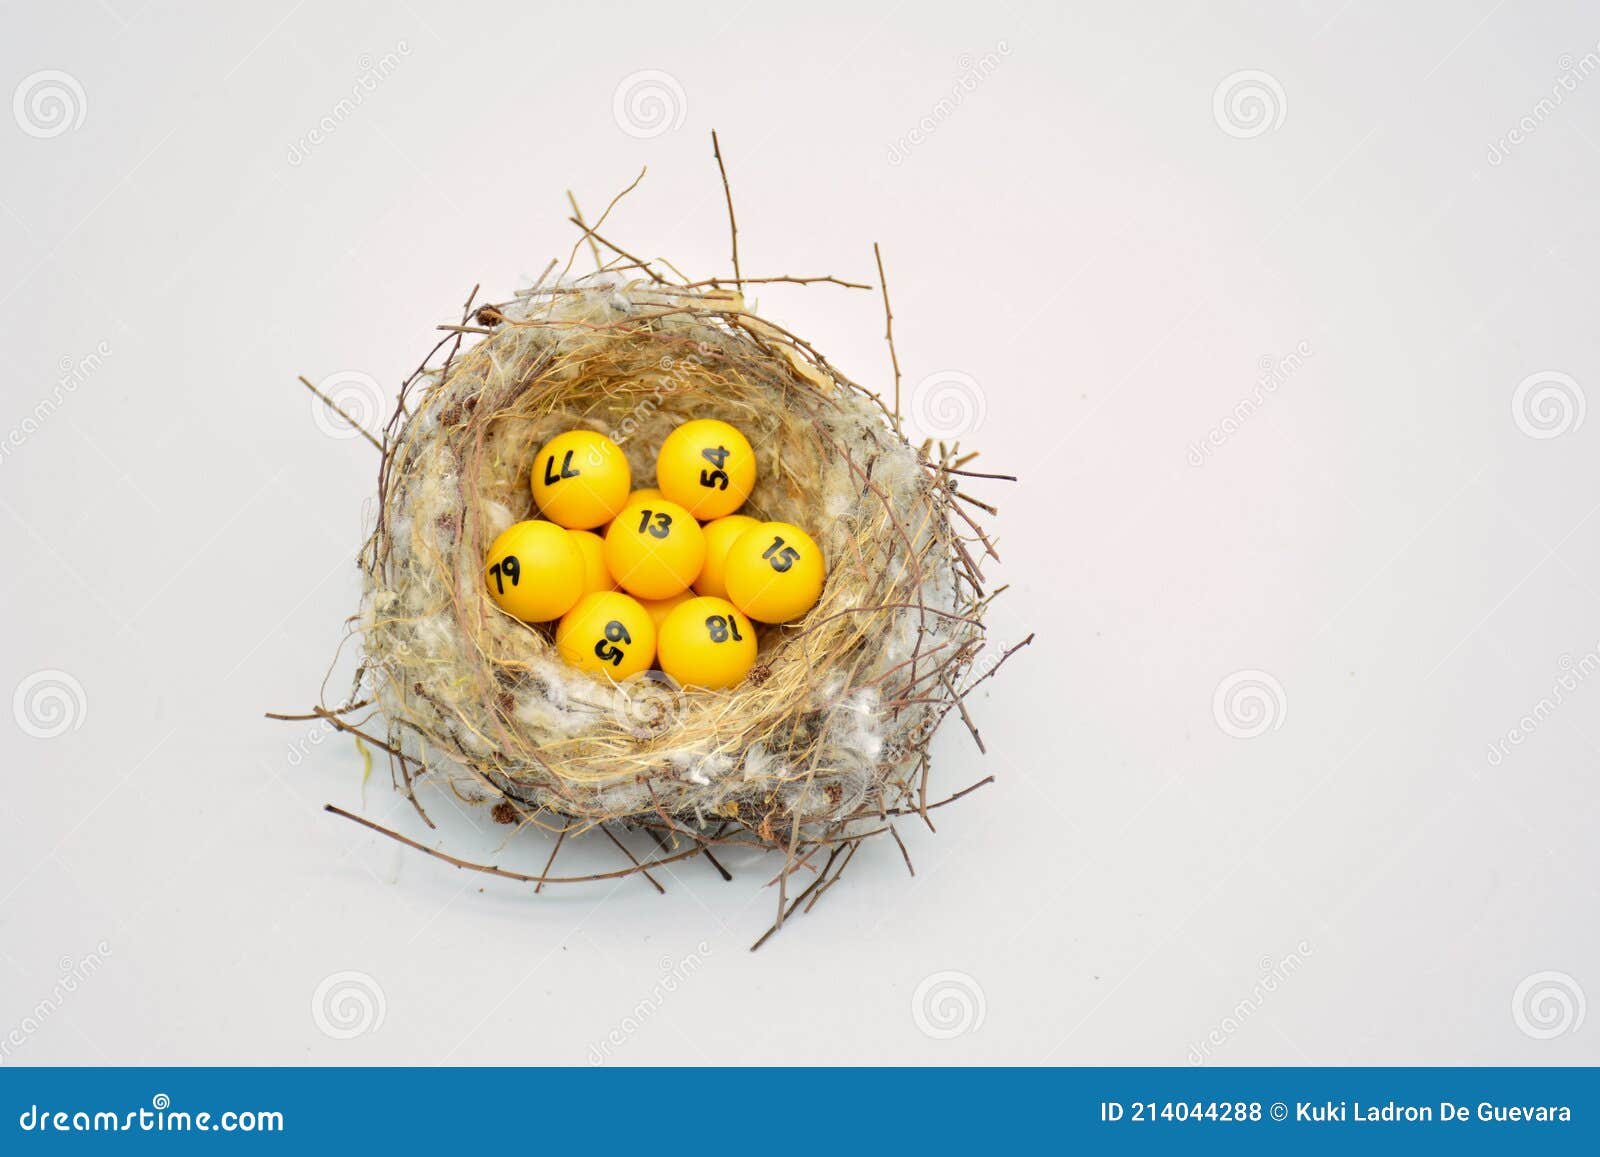 lottery balls in a nest